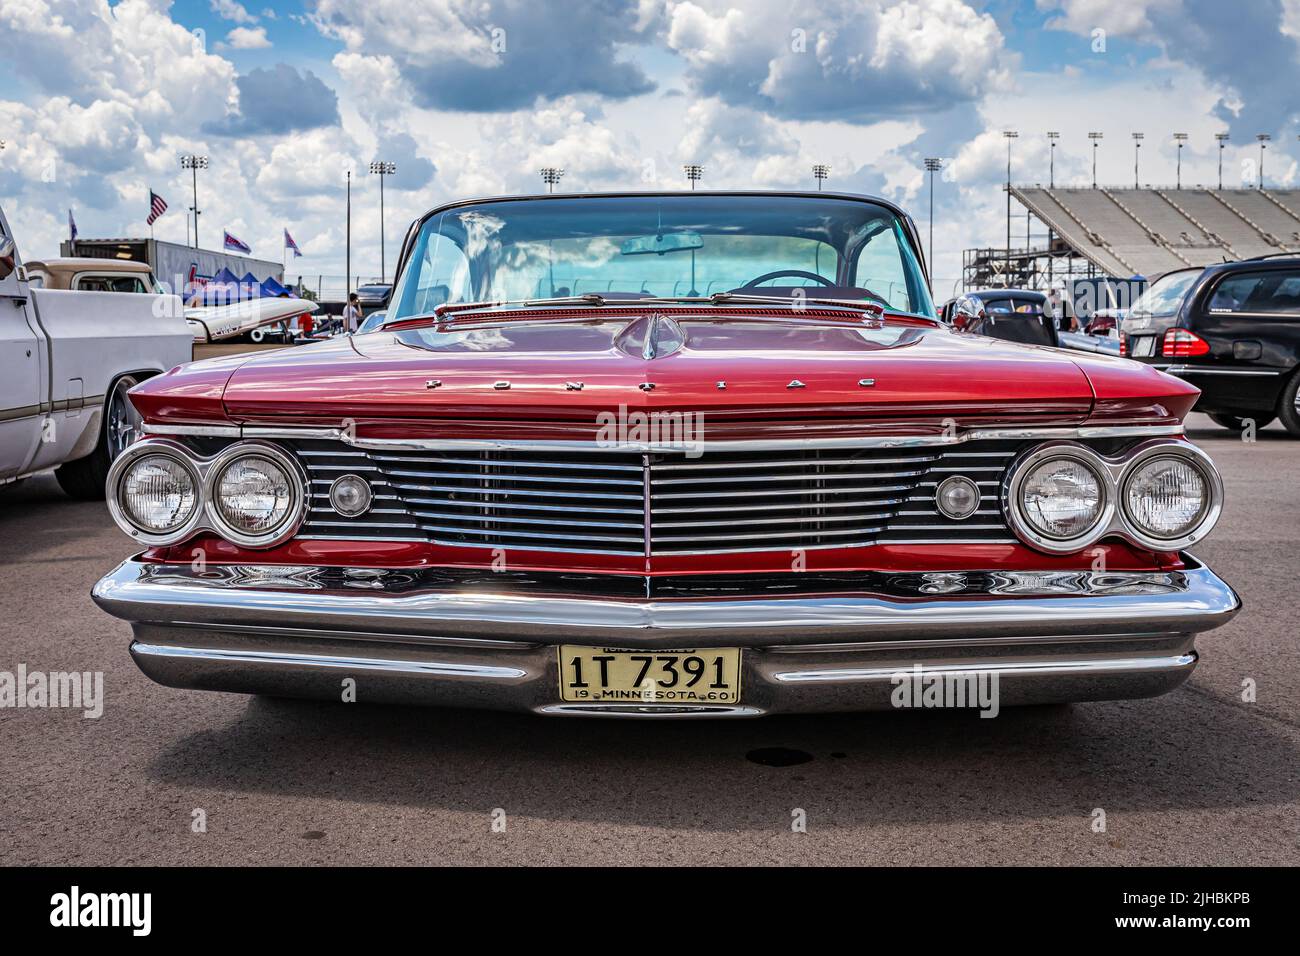 Lebanon, TN - May 14, 2022: Low perspective front view of a 1960 Pontiac Parisienne Hardtop Coupe at a local car show. Stock Photo